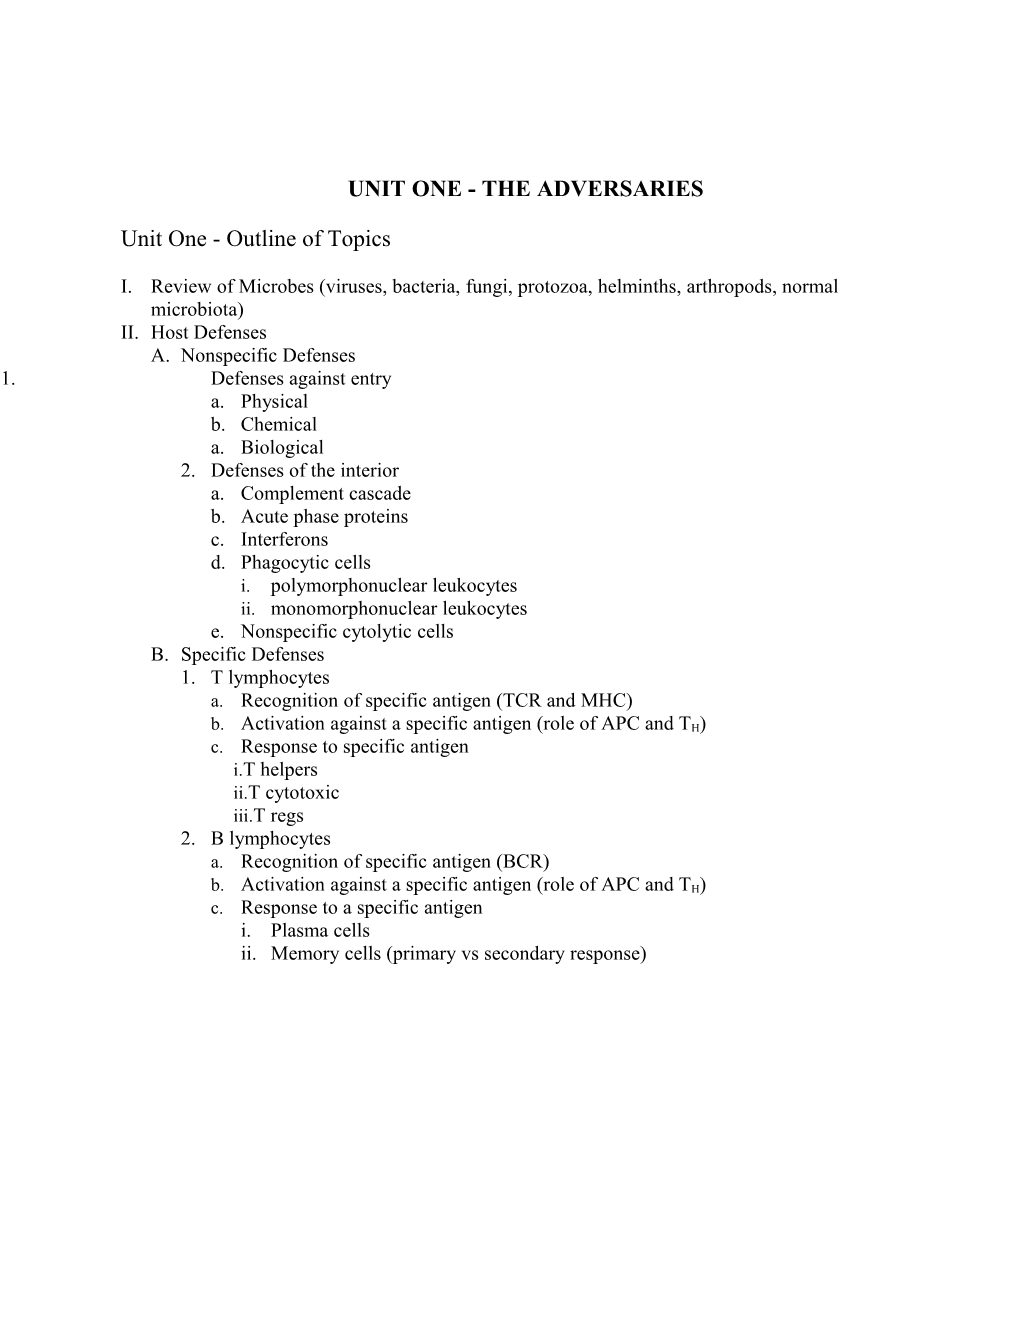 BIO 580 -Medical Microbiology - Unit One- the Adversaries Part I - Review of Microbes